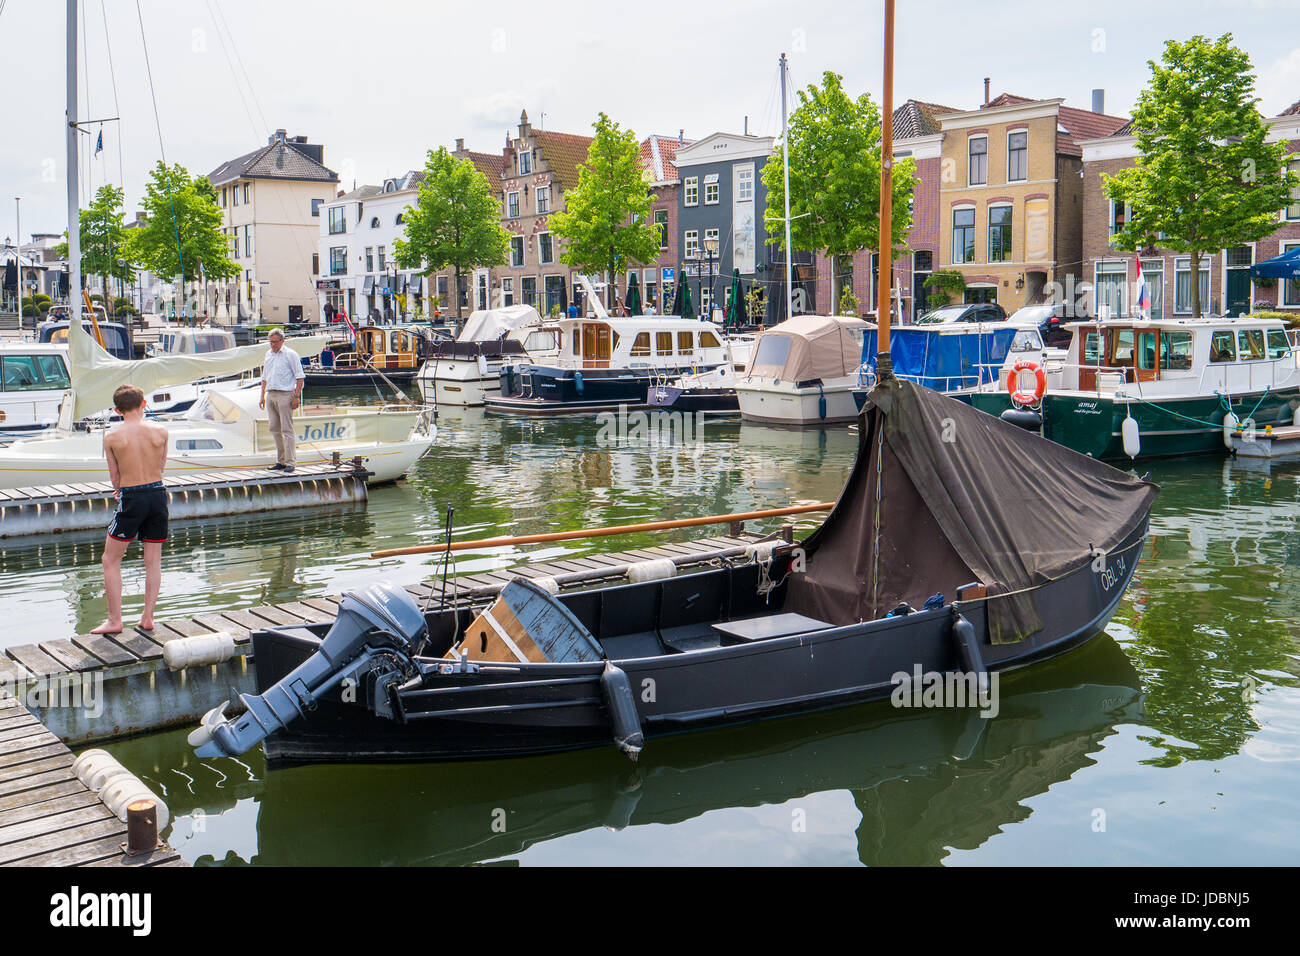 People and boats in marina of old town of Oud-Beijerland, Hoeksche Waard, South Holland, Netherlands Stock Photo